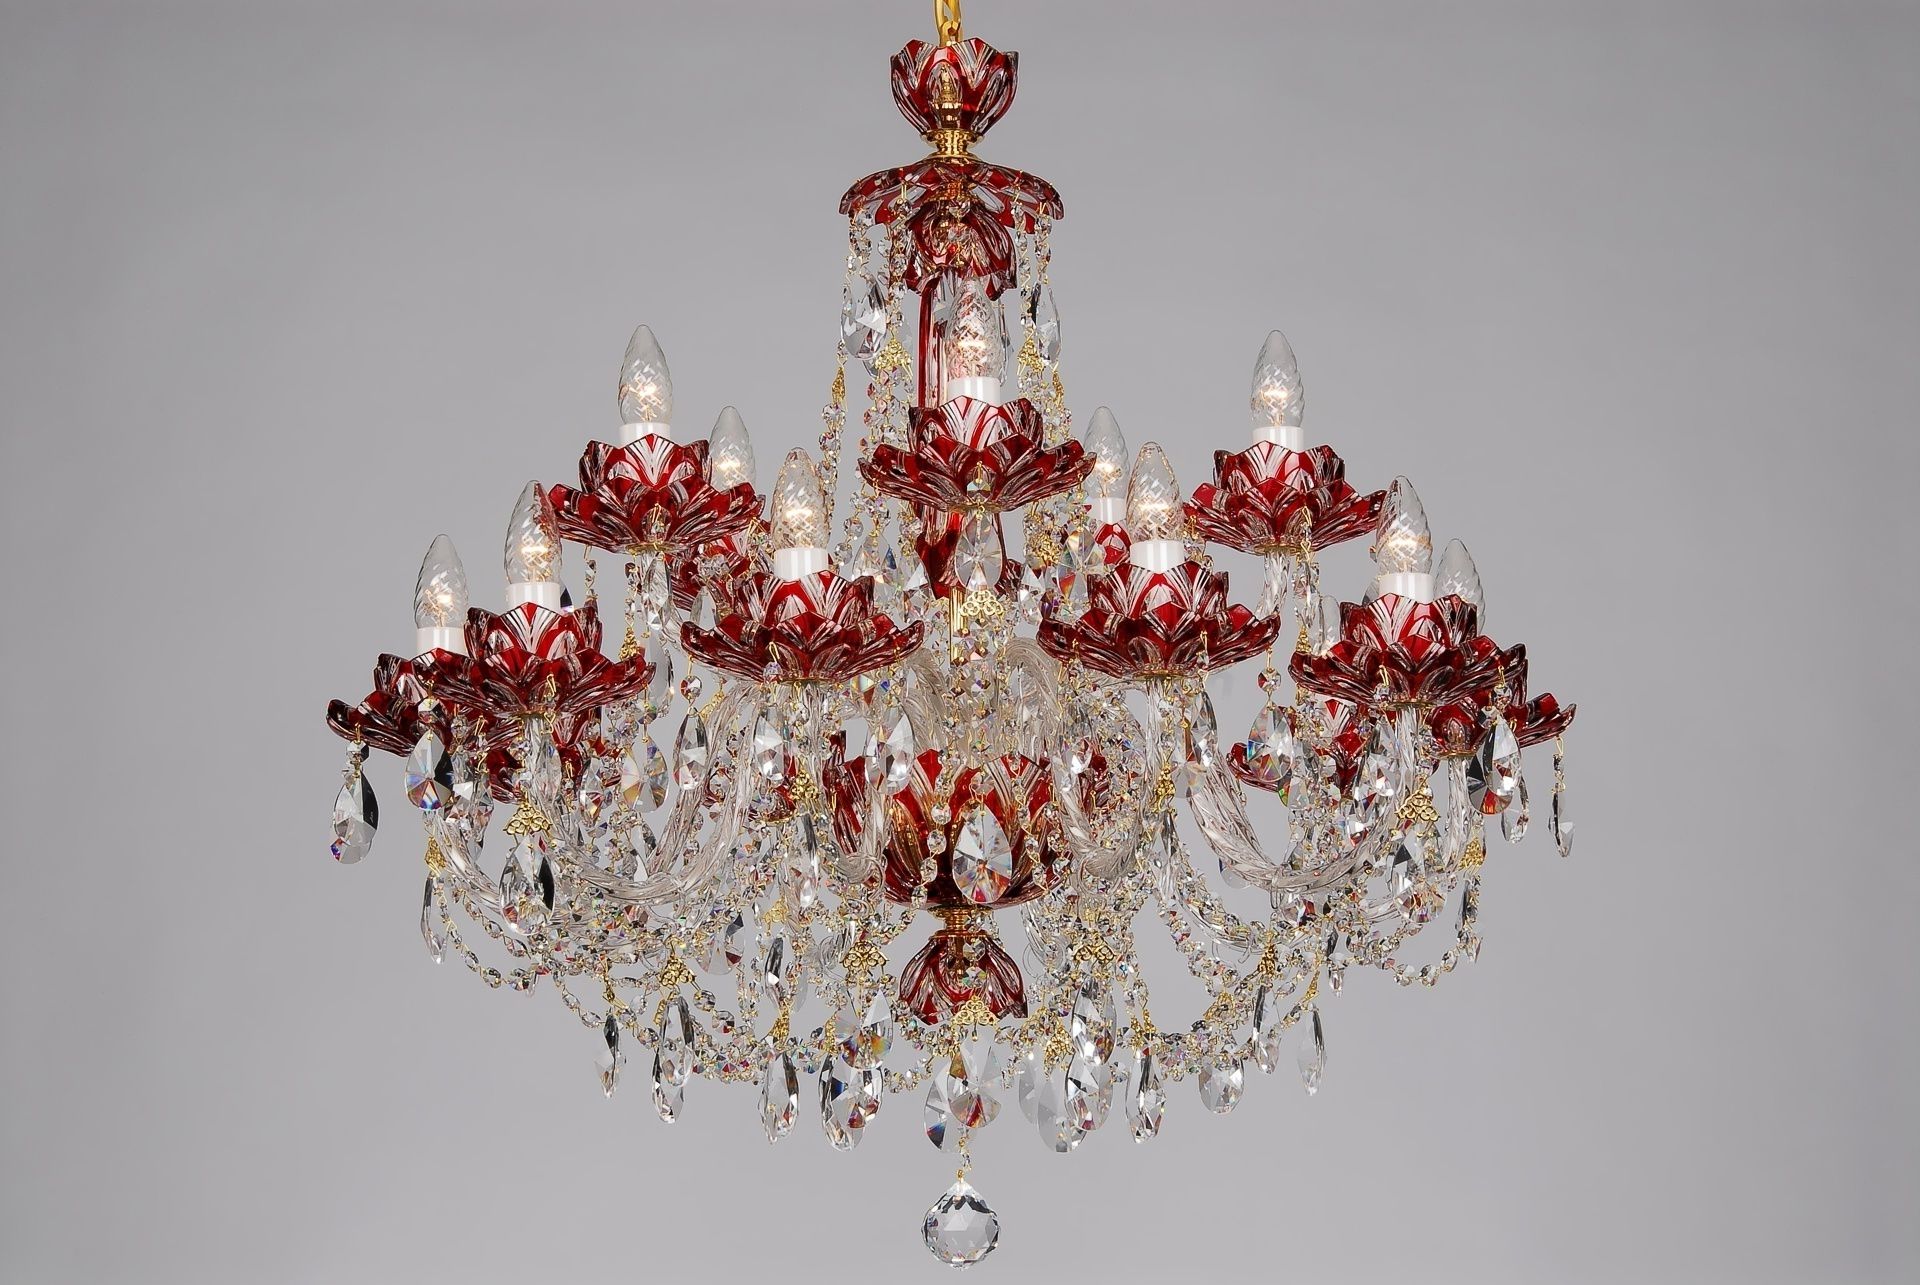 Modern Red Chandelier With Well Liked Fifteen Arm Red Crystal Chandelier With Lotus Flower Design Charming (View 9 of 20)